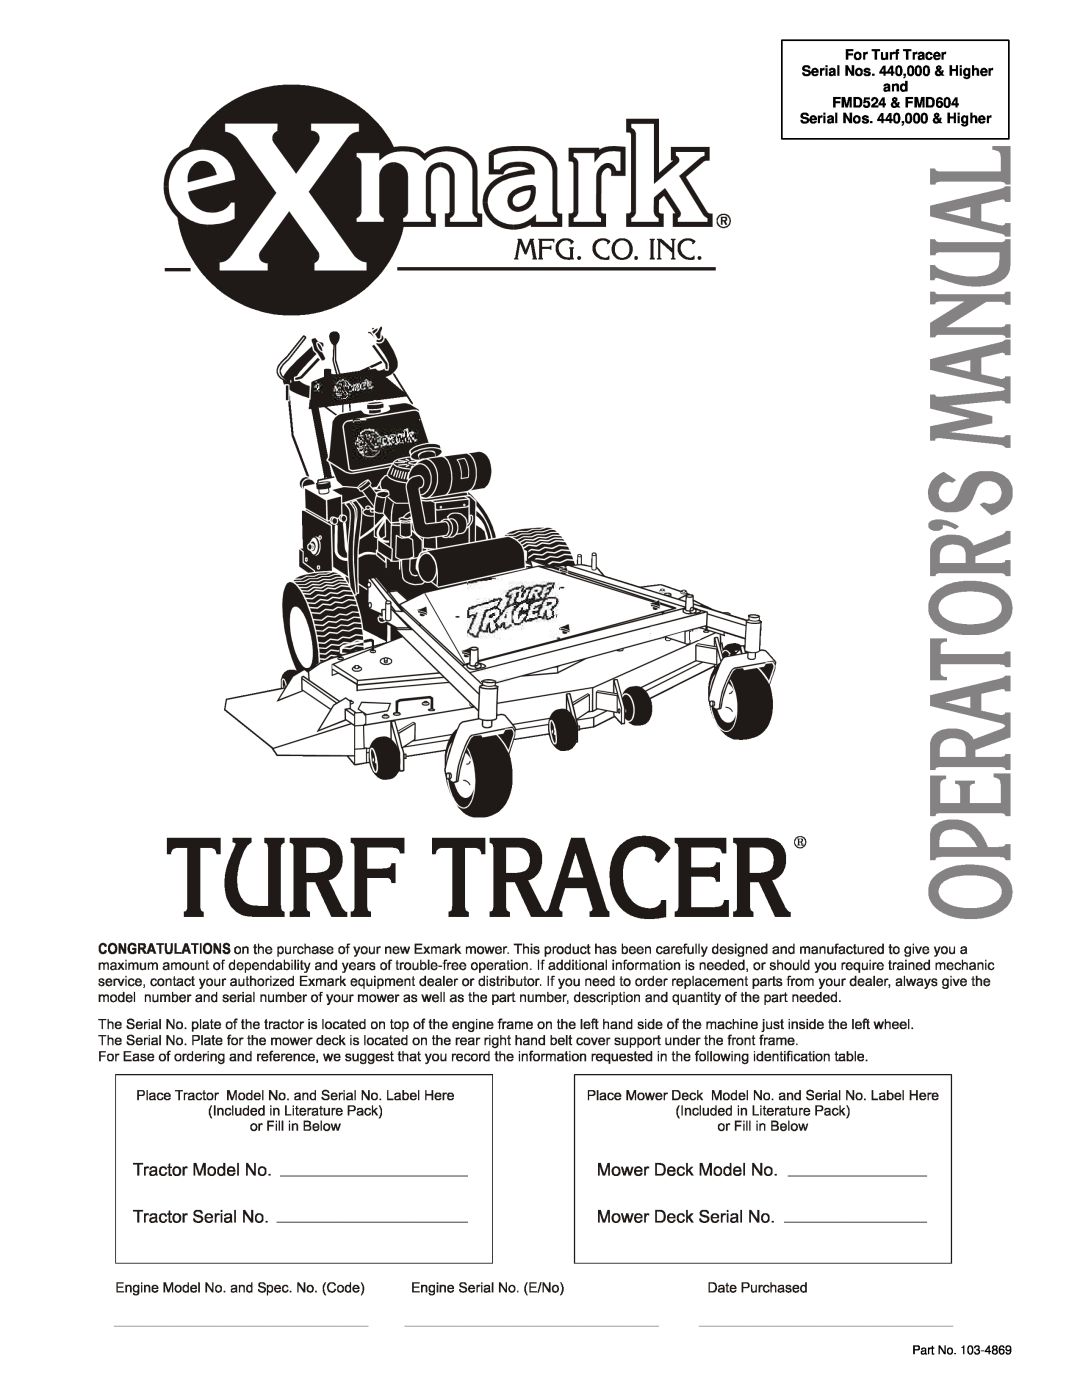 Exmark manual For Turf Tracer Serial Nos. 440,000 & Higher and FMD524 & FMD604 